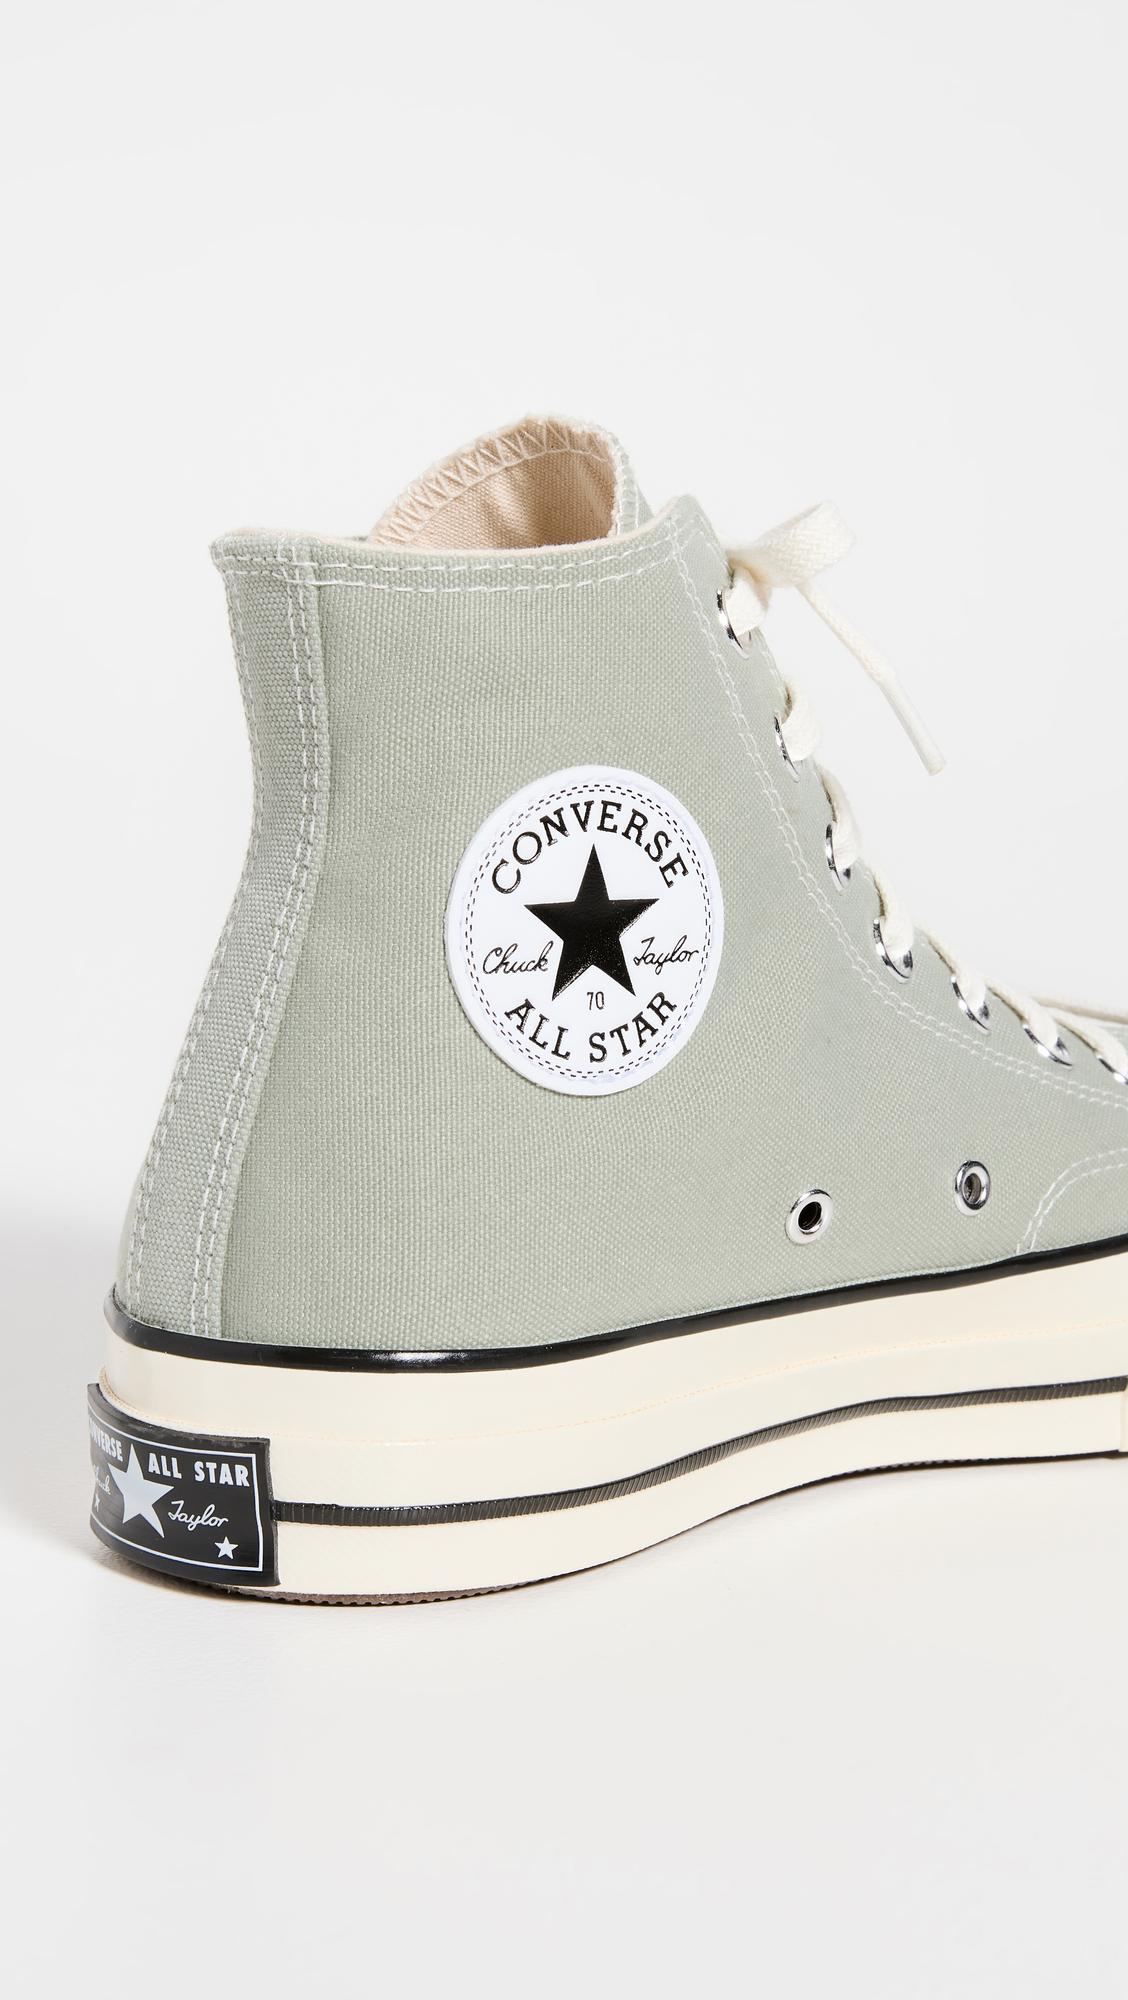 Converse Chuck 70 Spring Color High Top Sneakers in White | Lyst